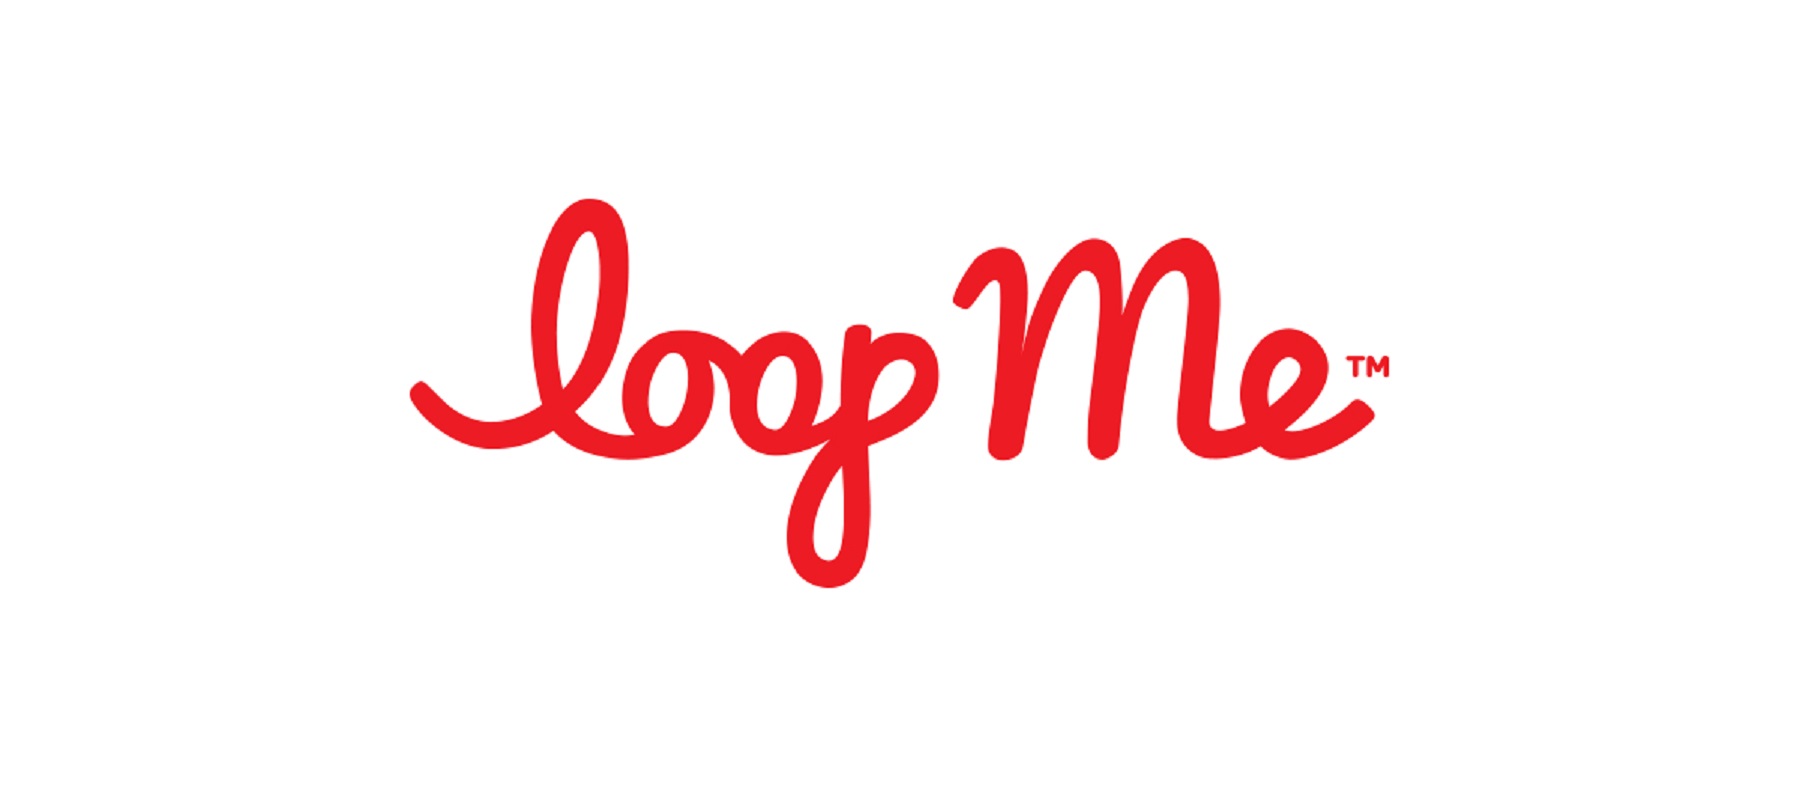 LoopMe joins the Network Advertising Initiative